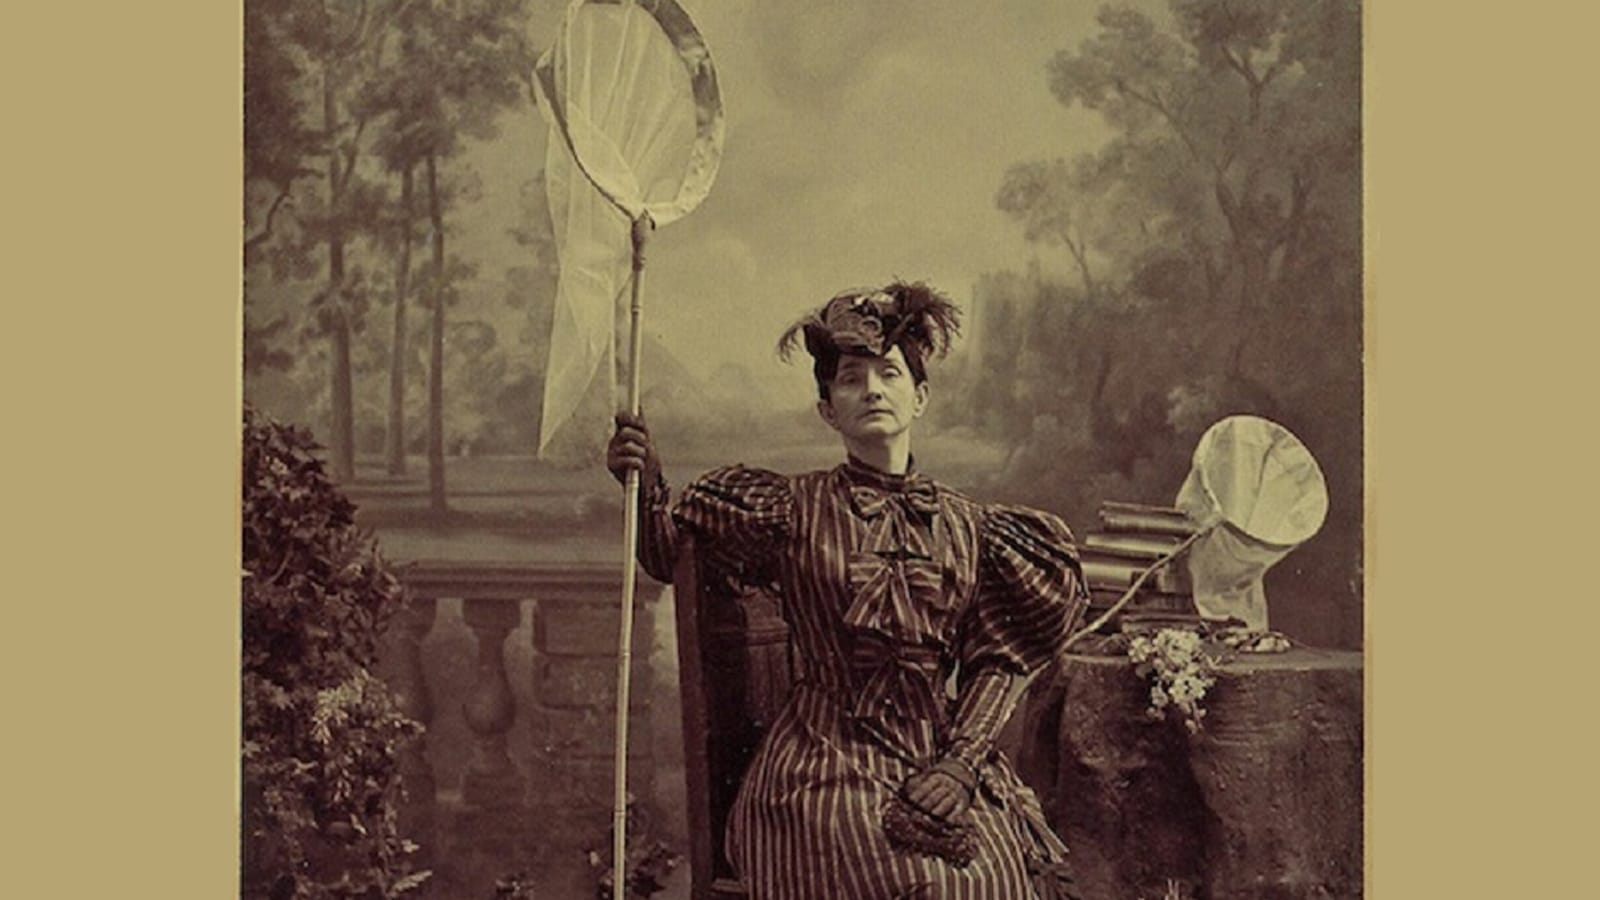 An old fashioned photo of a woman holding a butterfly net